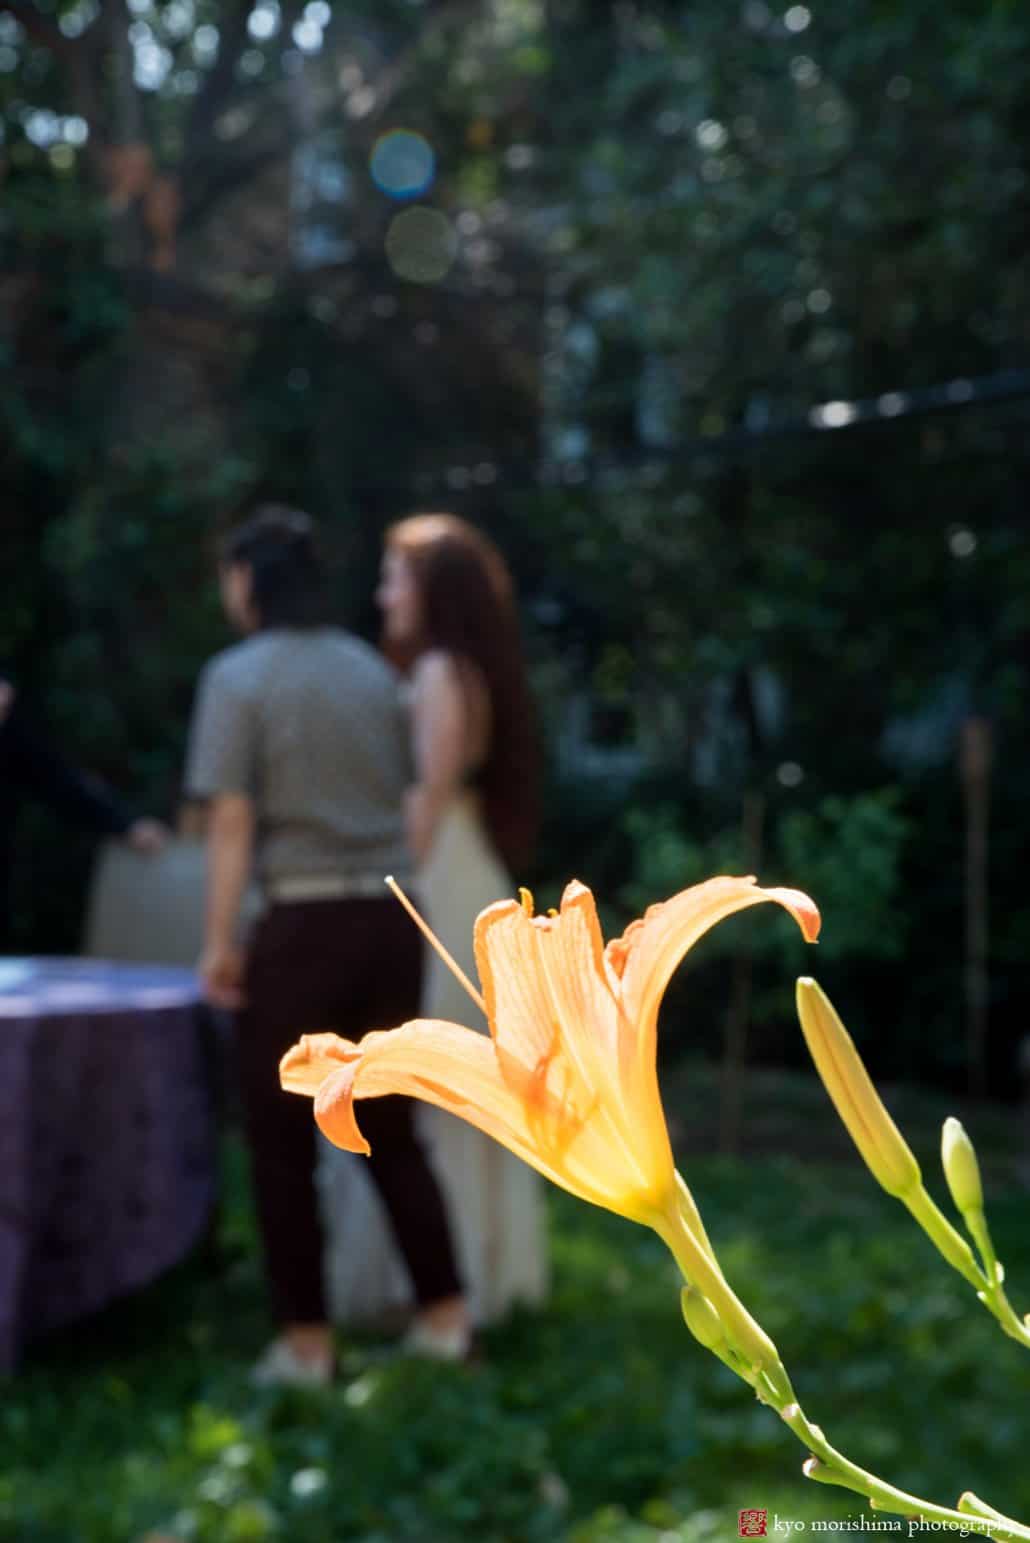 Daylily in the foreground as bride and her partner wait to sign the ketubah in backyard wedding ceremony, photographed by Kyo Morishima